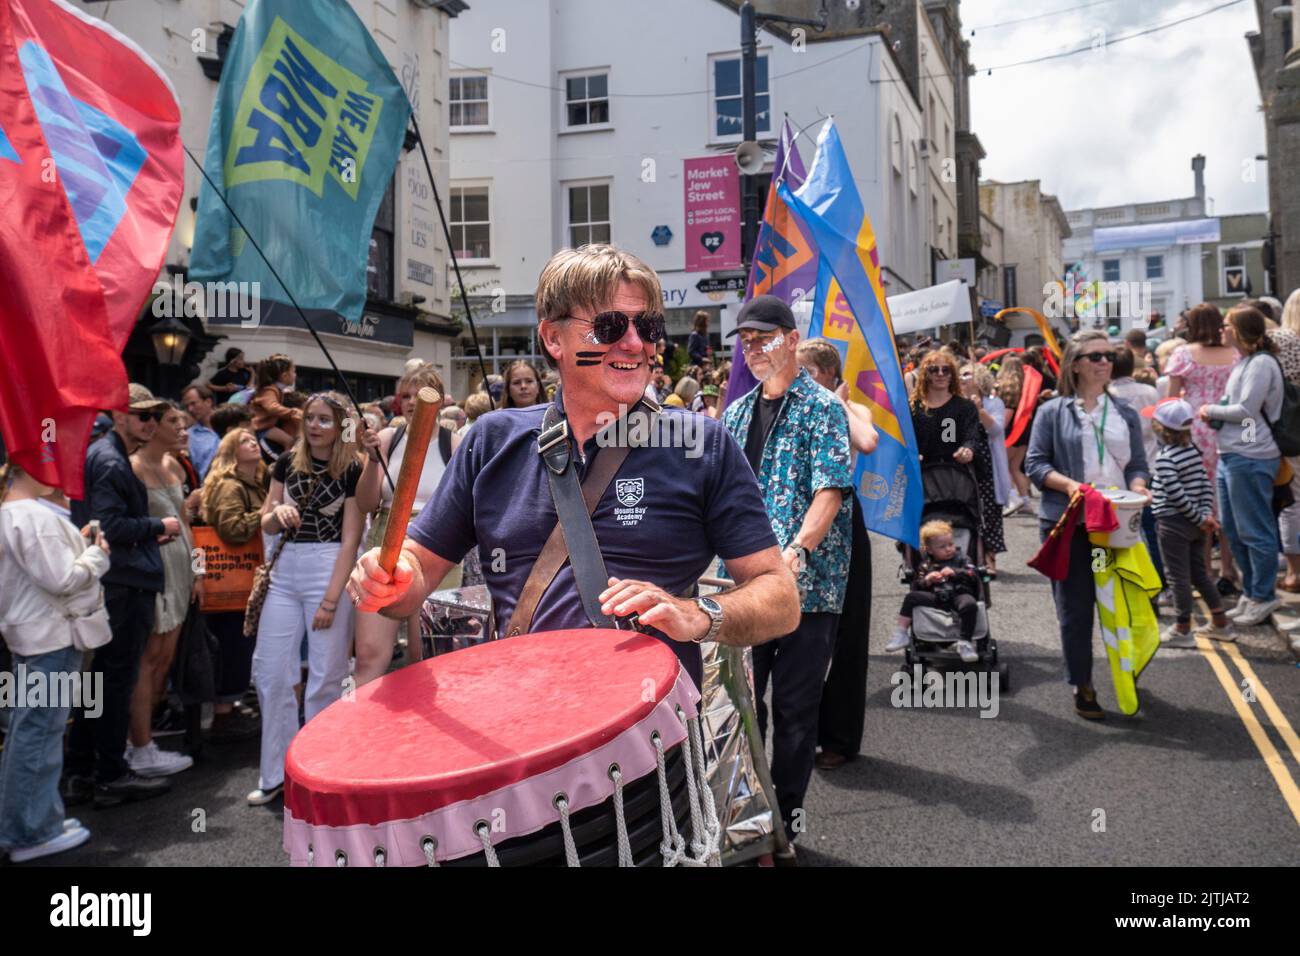 Mounts Bay Academy participating in the Mazey Day parade celebrations as part of the Golowan Festival in Penzance in Cornwall in the UK. Stock Photo